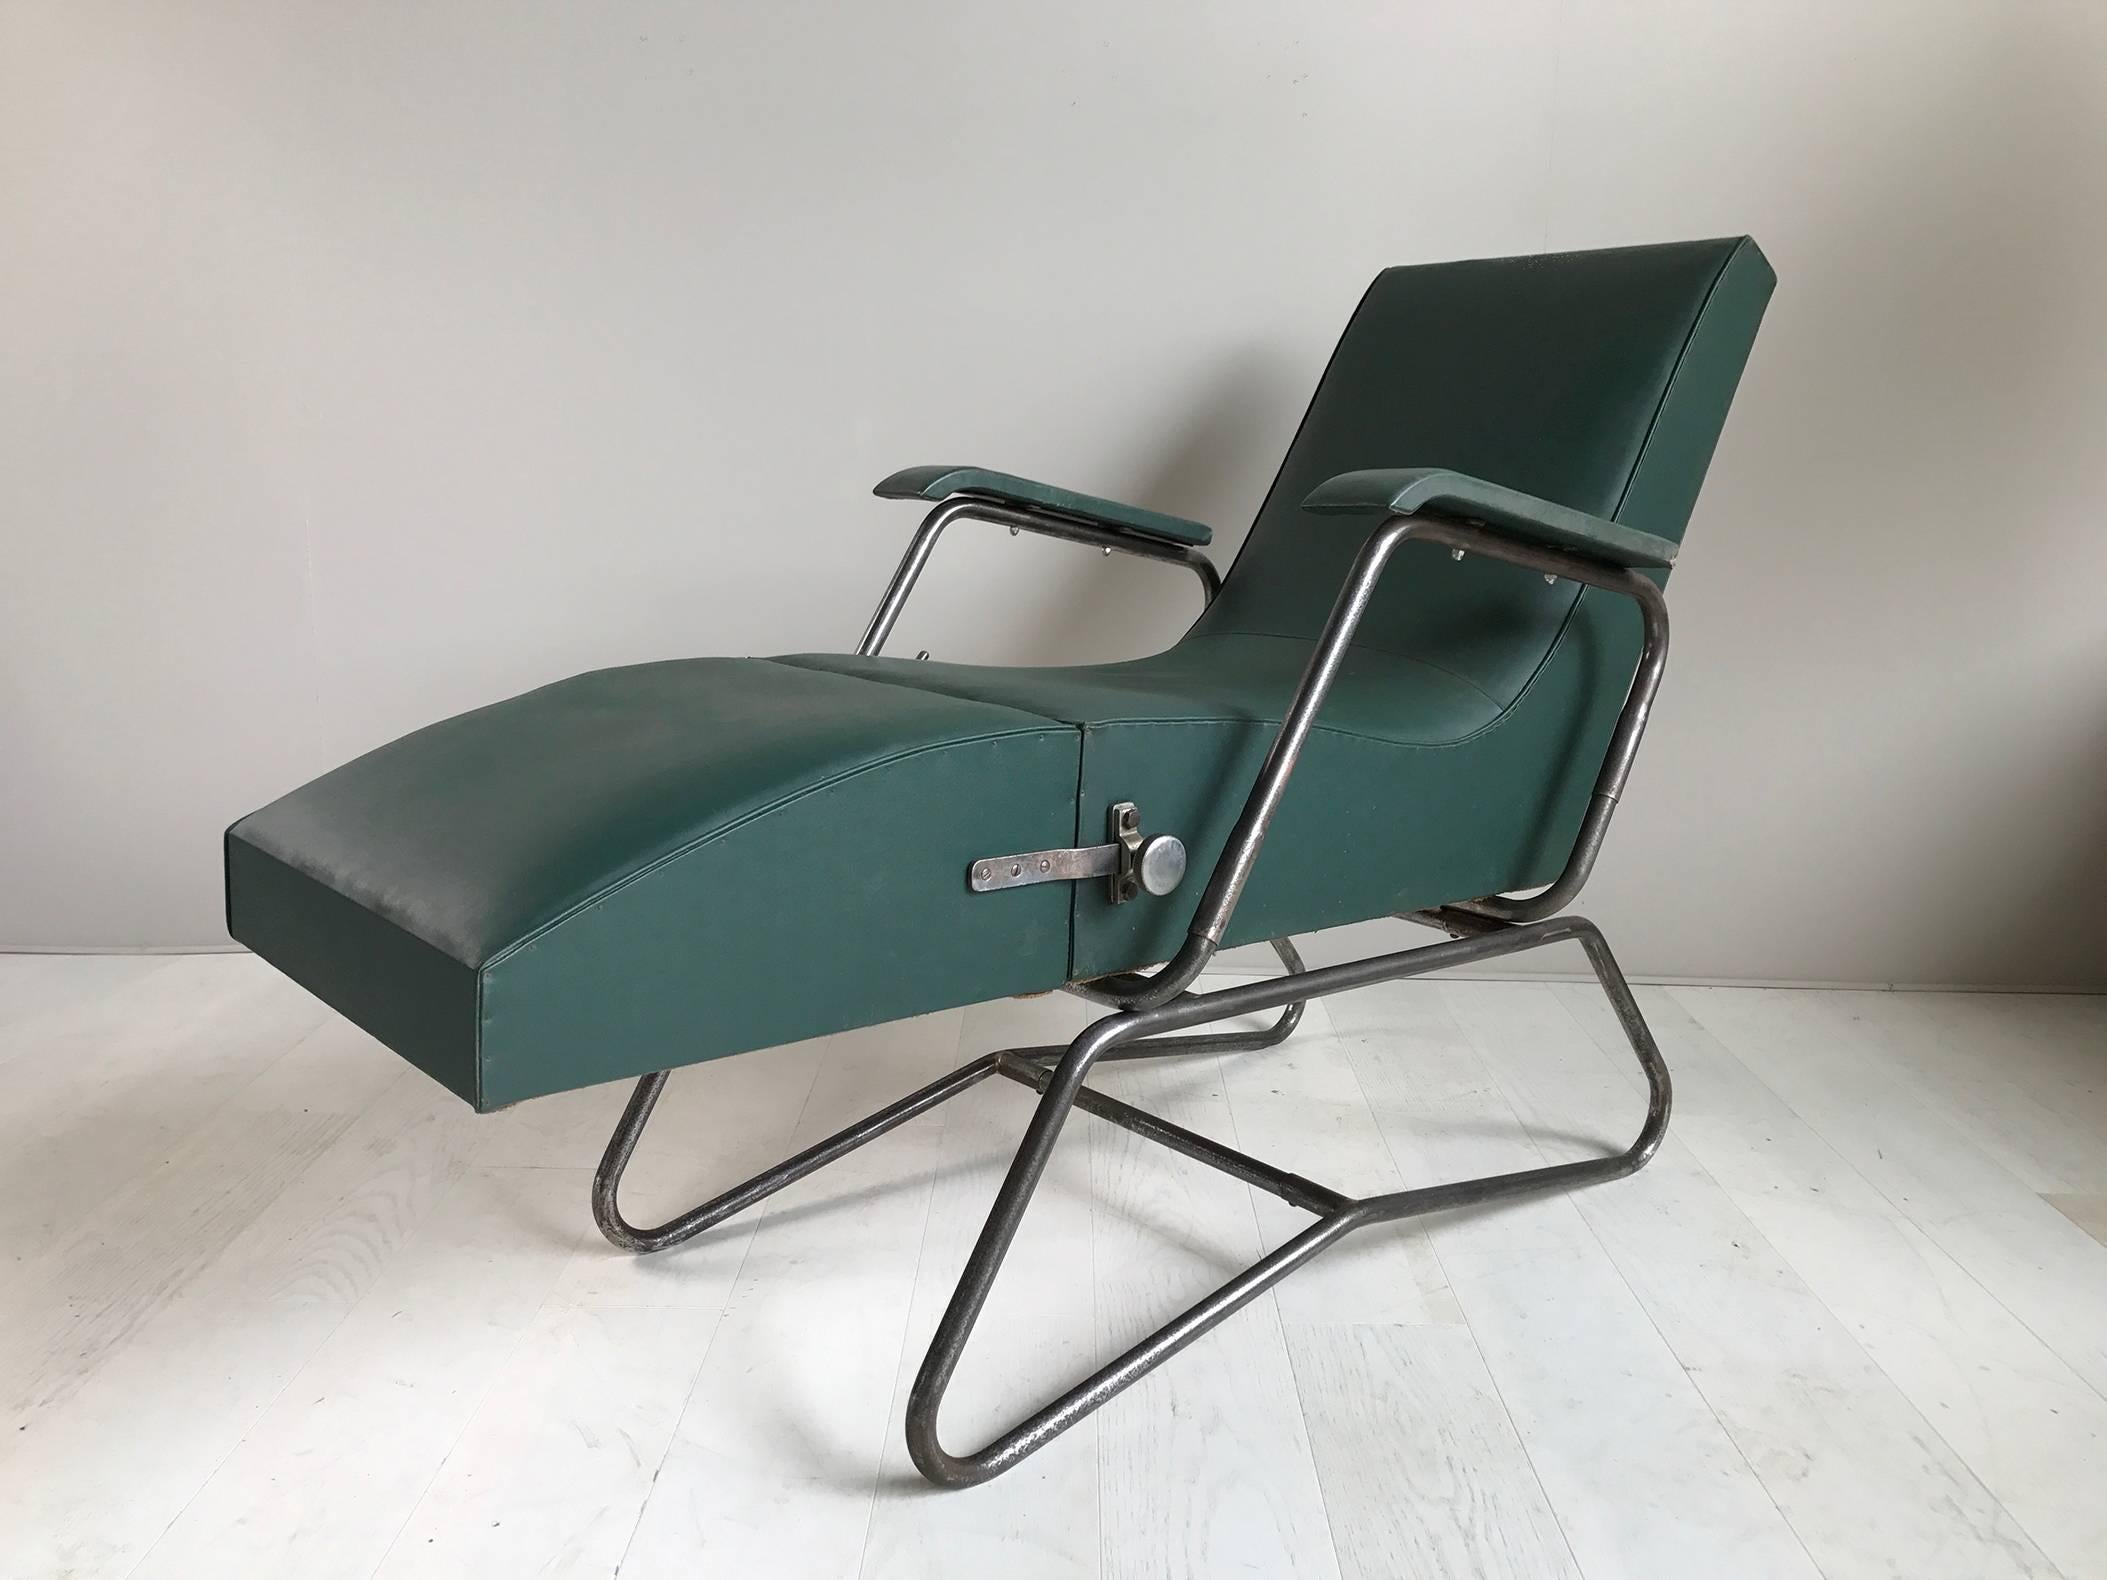 Exceptional lounge chair system tubular metal and green moleskin signed Dupré and Perrin, Paris, France 1930. 
The design is attributed to Maurice Barret, interior architect member of the UAM (Union of Modern Artists). The footrest is removable,